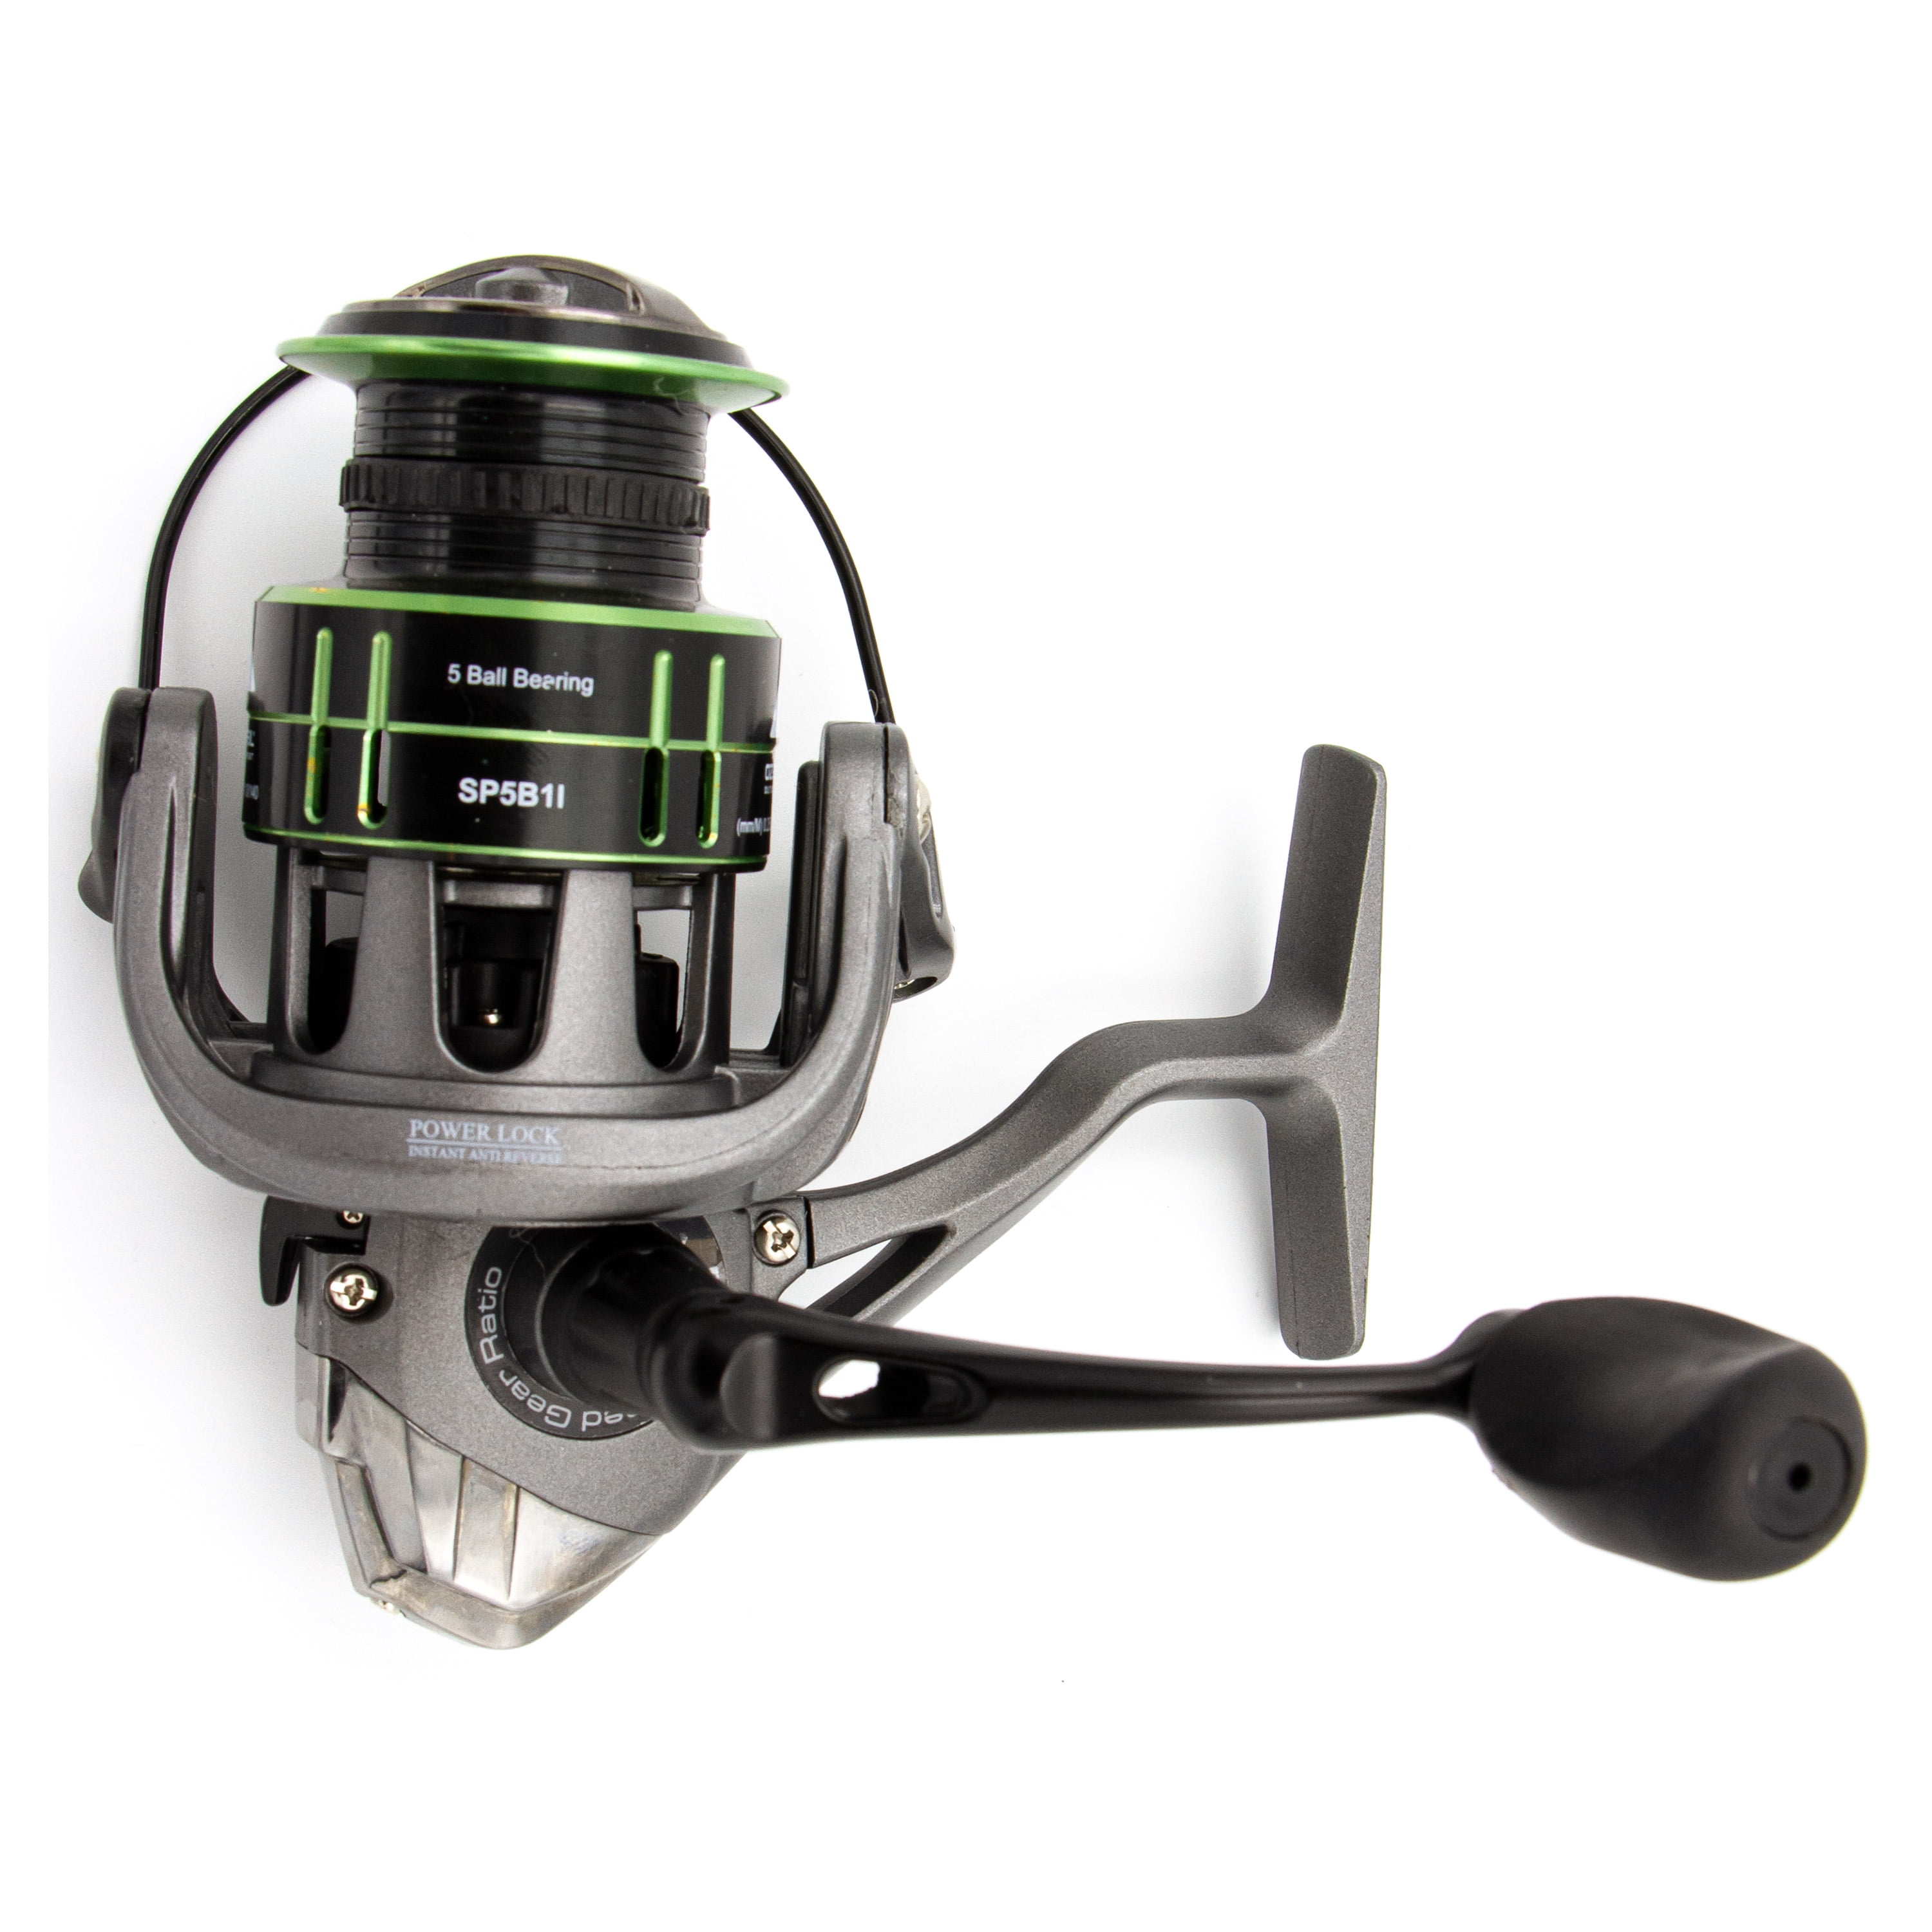 Walmart's Saltwater Sealed Reel From Ozark Trail Features Review   Walmart's sealed saltwater reel initial review. This reel is available in  4000, 6000 and 8000 sizes. In this video I go over